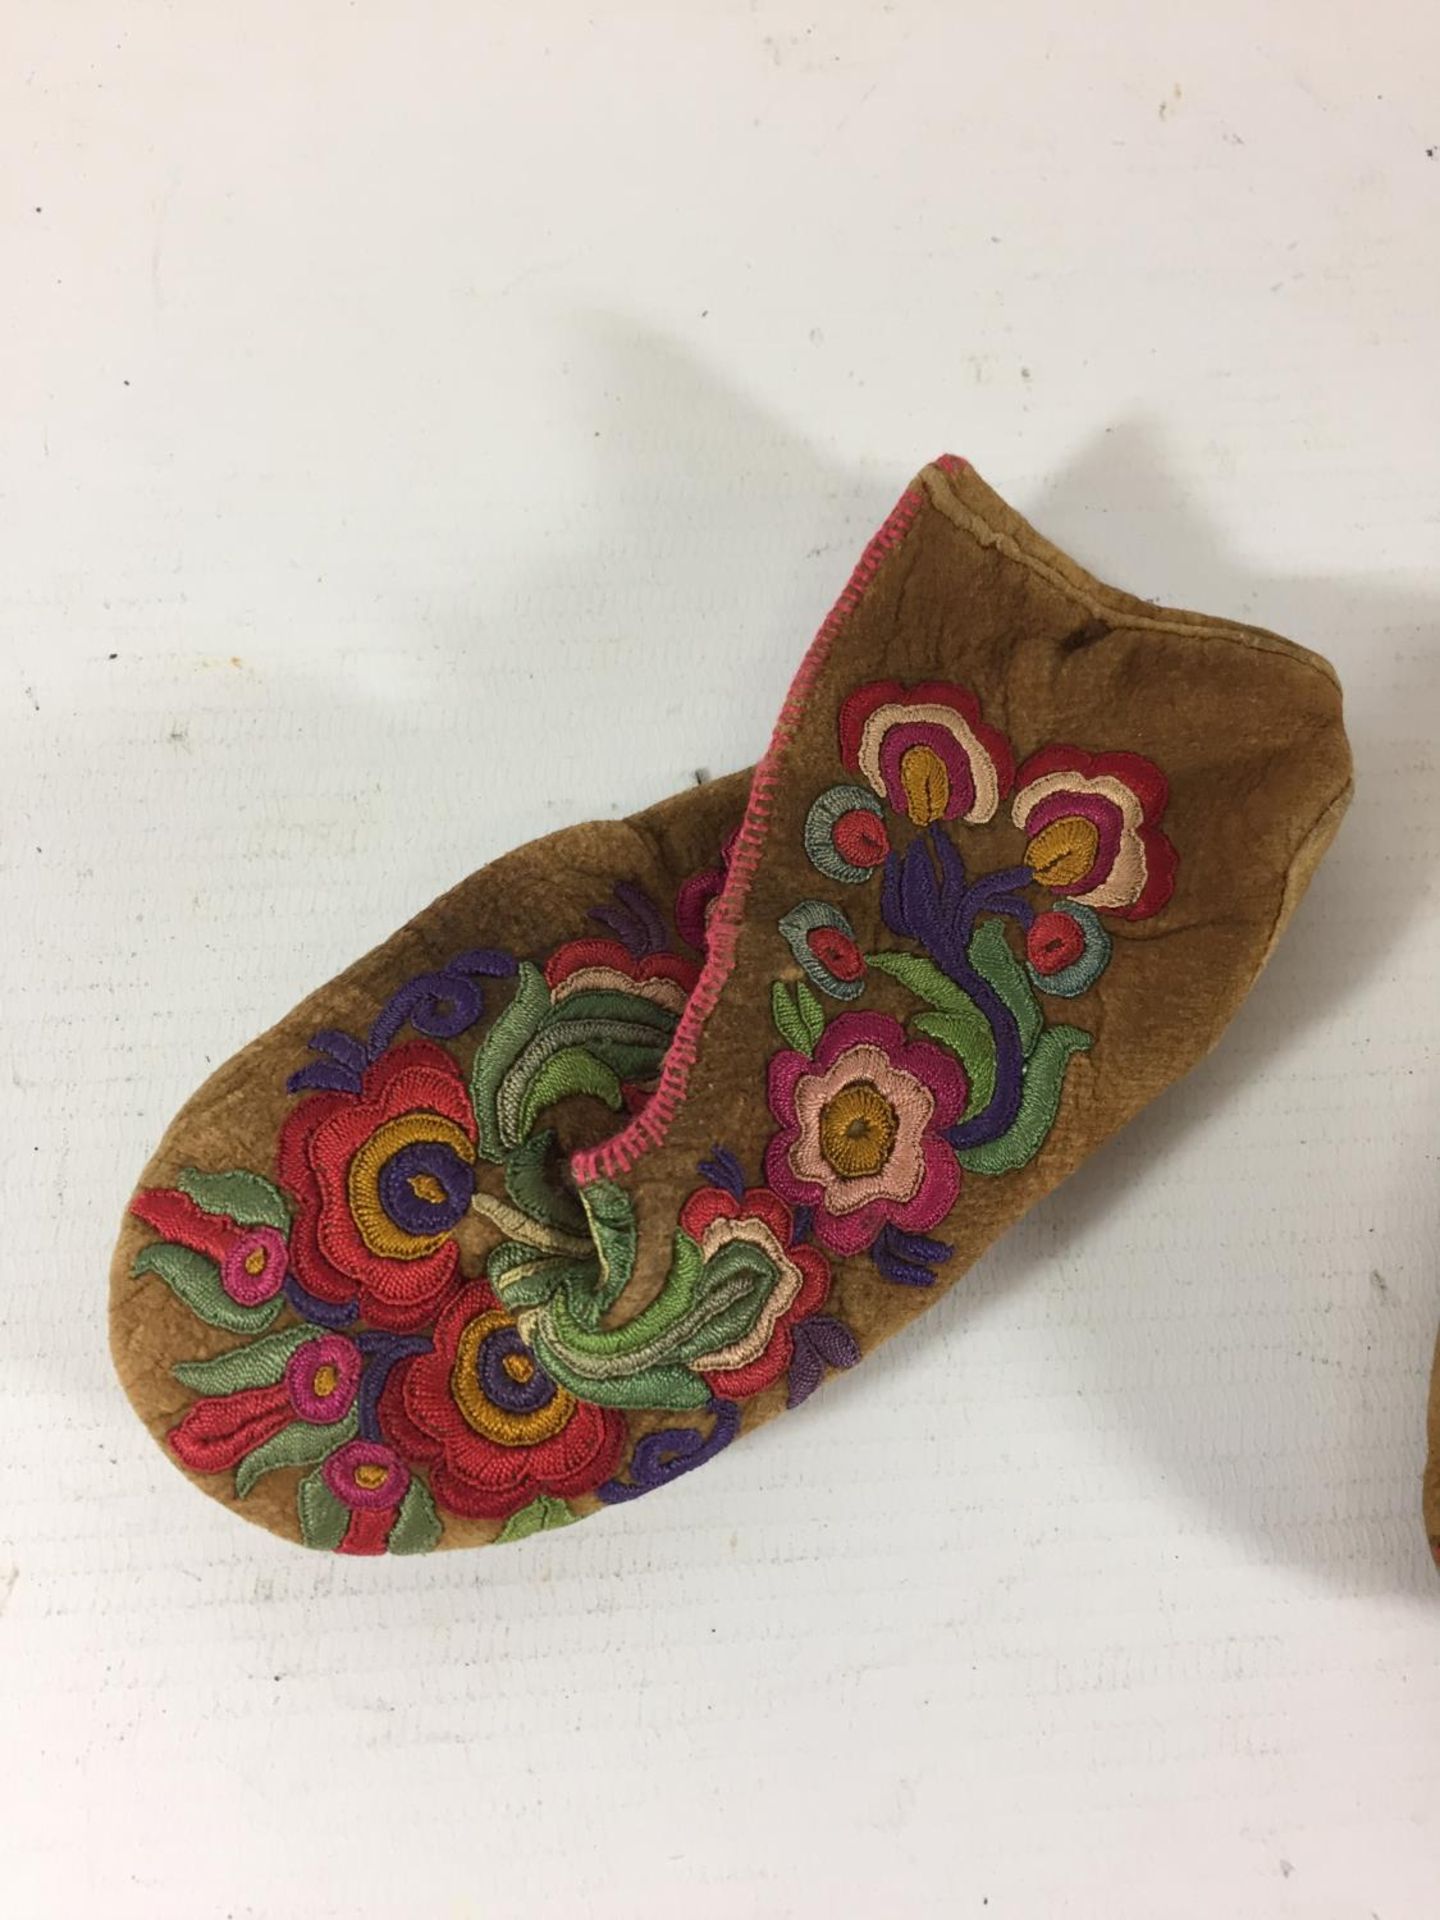 A PAIR OF EARLY TO MID 20TH CENTURY CANADIAN BABIES MOCCASINS, WITHHAND EMBROIDERED FLORAL - Image 2 of 4